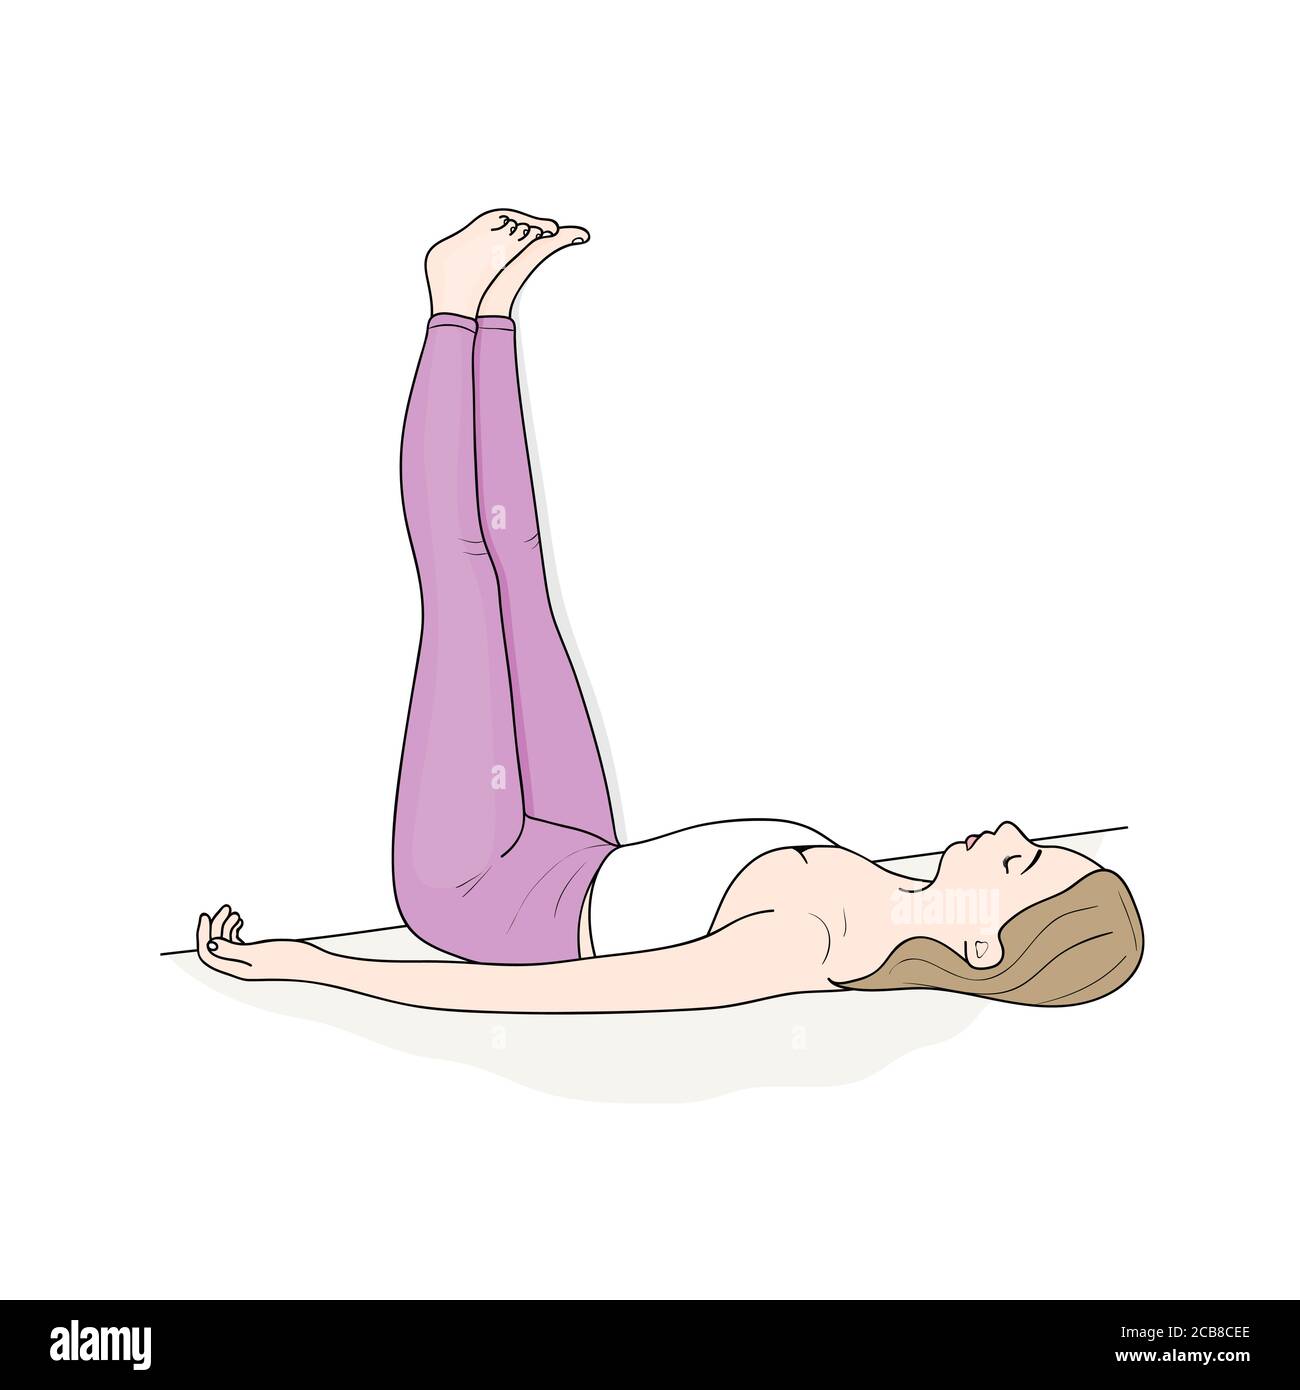 Legs-Up-The-Wall Pose | FindATopDoc